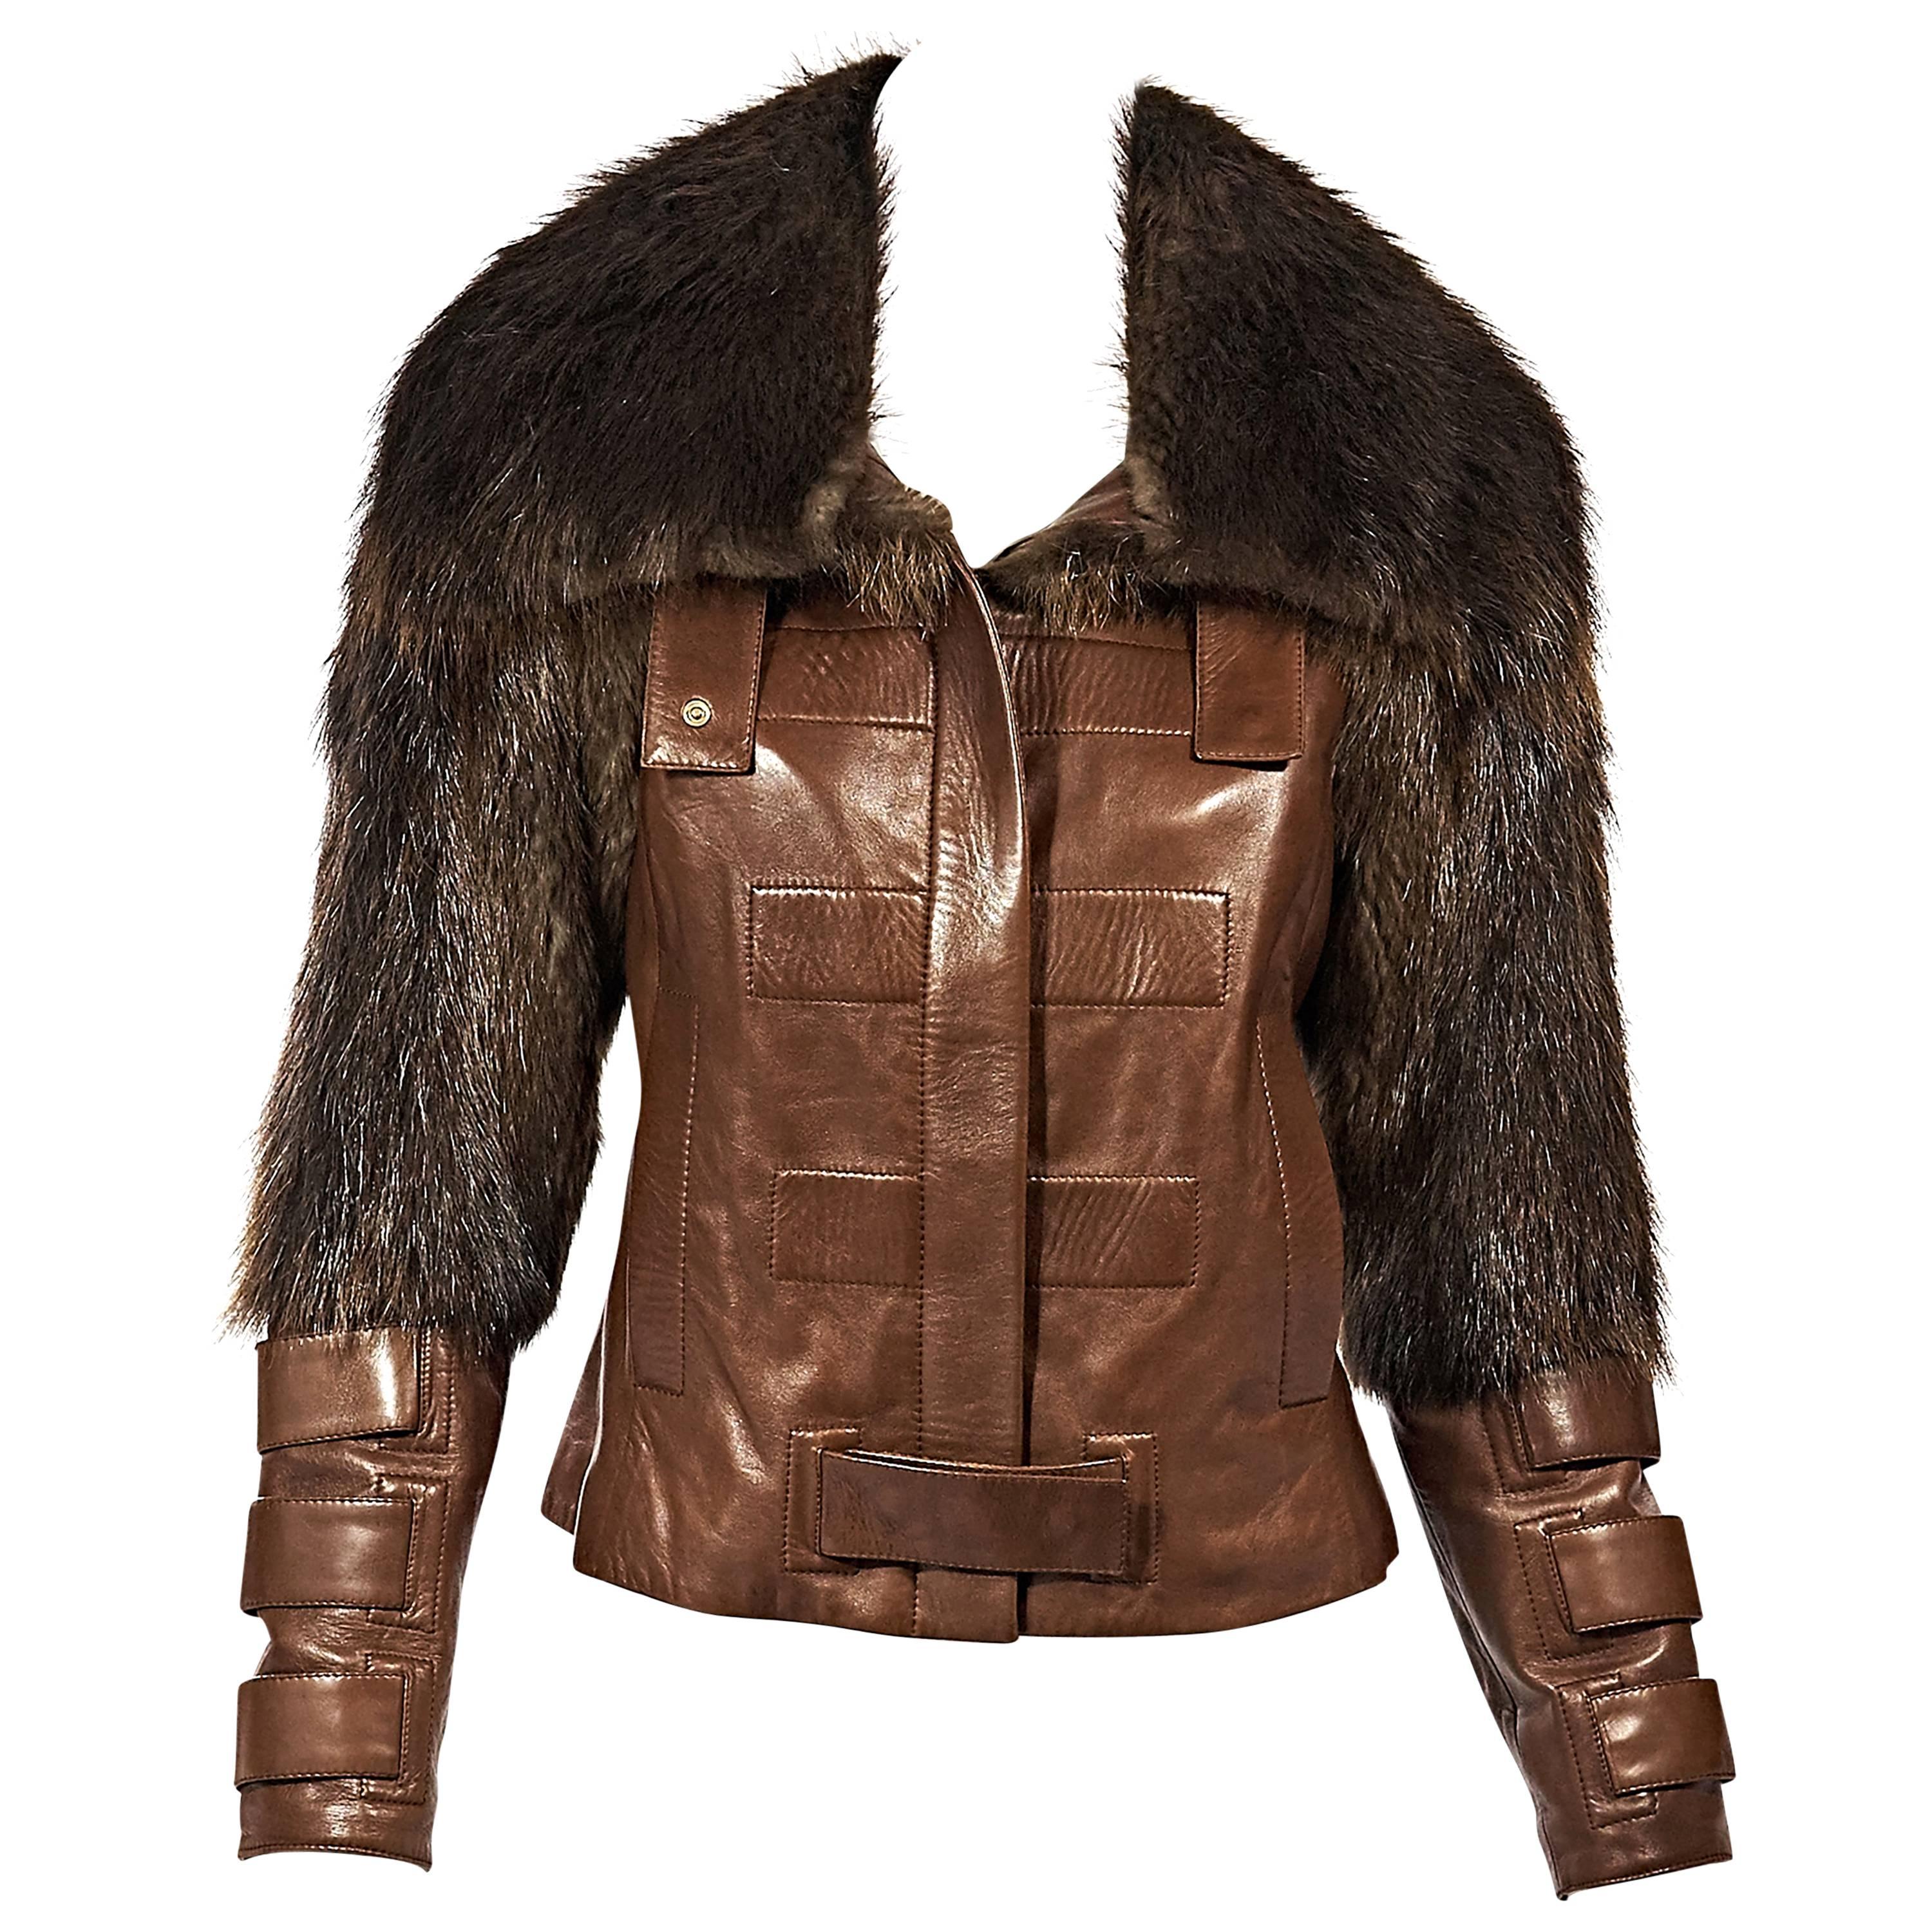 Brown Gucci Fur-Trimmed Leather Jacket